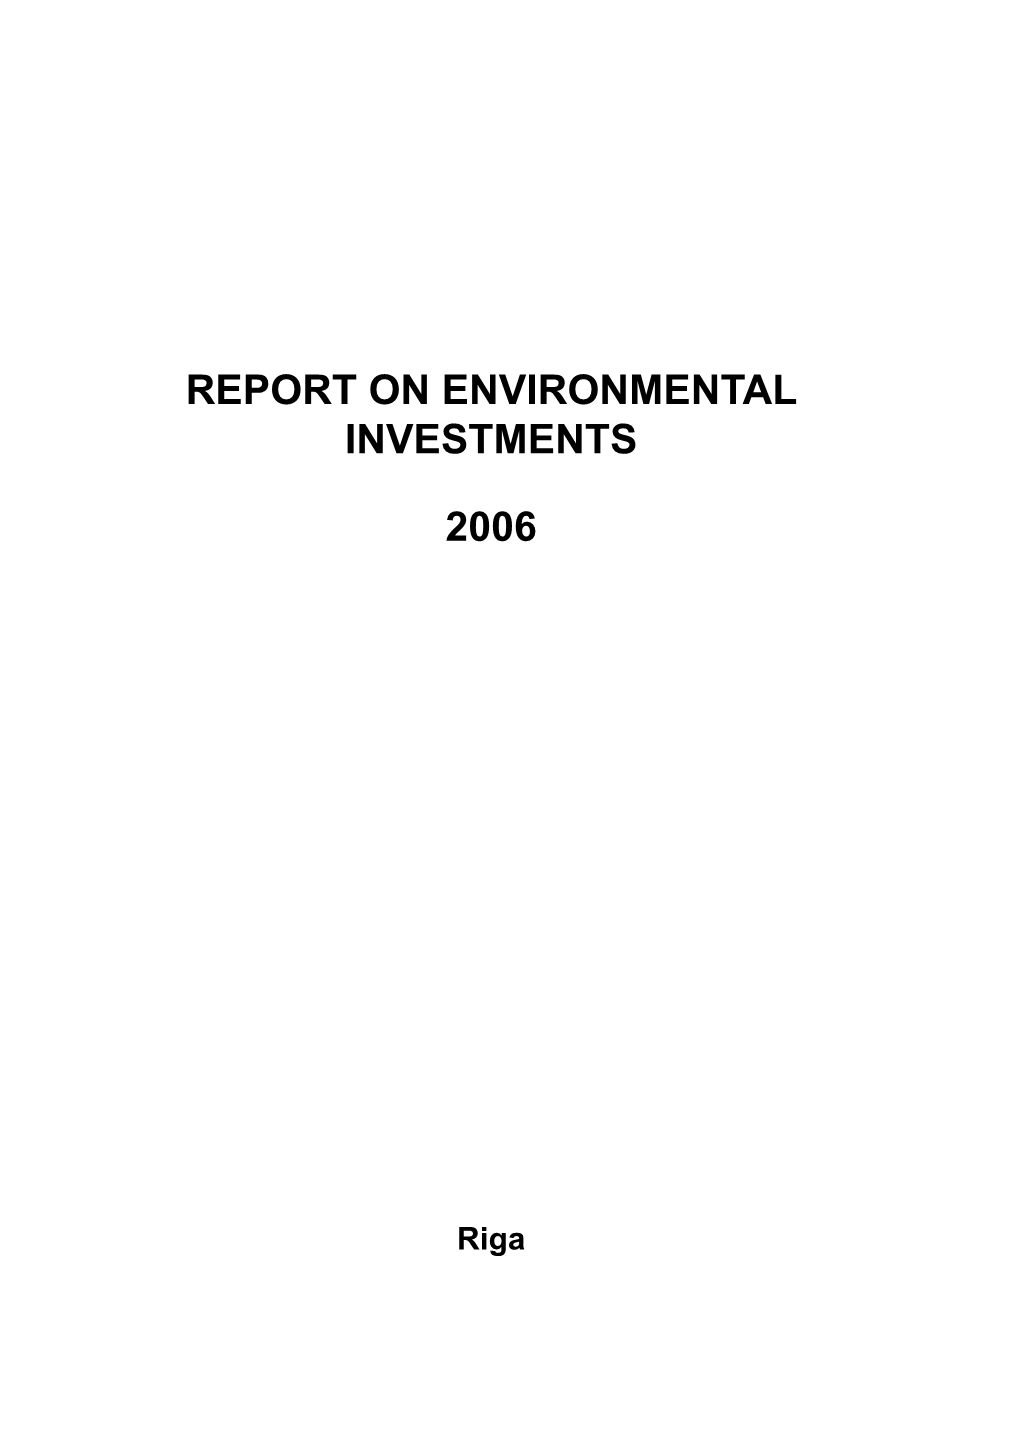 Report on Environmental Investments 2006